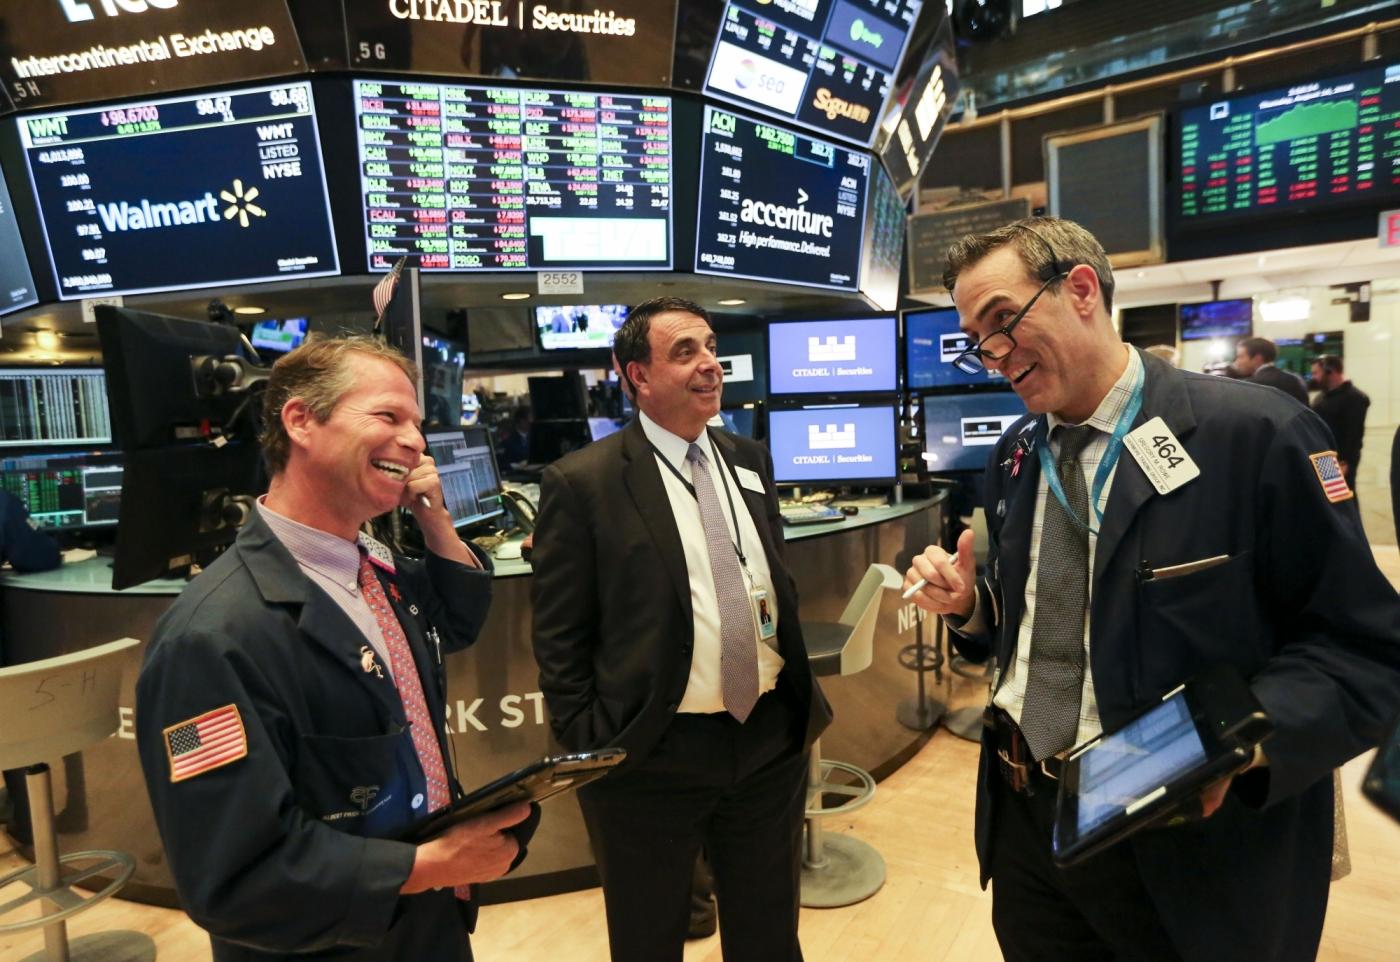 NEW YORK, Aug. 16, 2018 (Xinhua) -- Traders work at the New York Stock Exchange in New York, the United States, Aug. 16, 2018. U.S. stocks closed higher on Thursday with the Dow soaring nearly 400 points amid hopes for the U.S-China trade talks. The Dow Jones Industrial Average surged 396.32 points, or 1.58 percent, to 25,558.73. The S&P 500 rose 22.32 points, or 0.79 percent, to 2,840.69. The Nasdaq Composite Index climbed 32.41 points, or 0.42 percent, to 7,806.52. (Xinhua/Wang Ying/IANS) by .